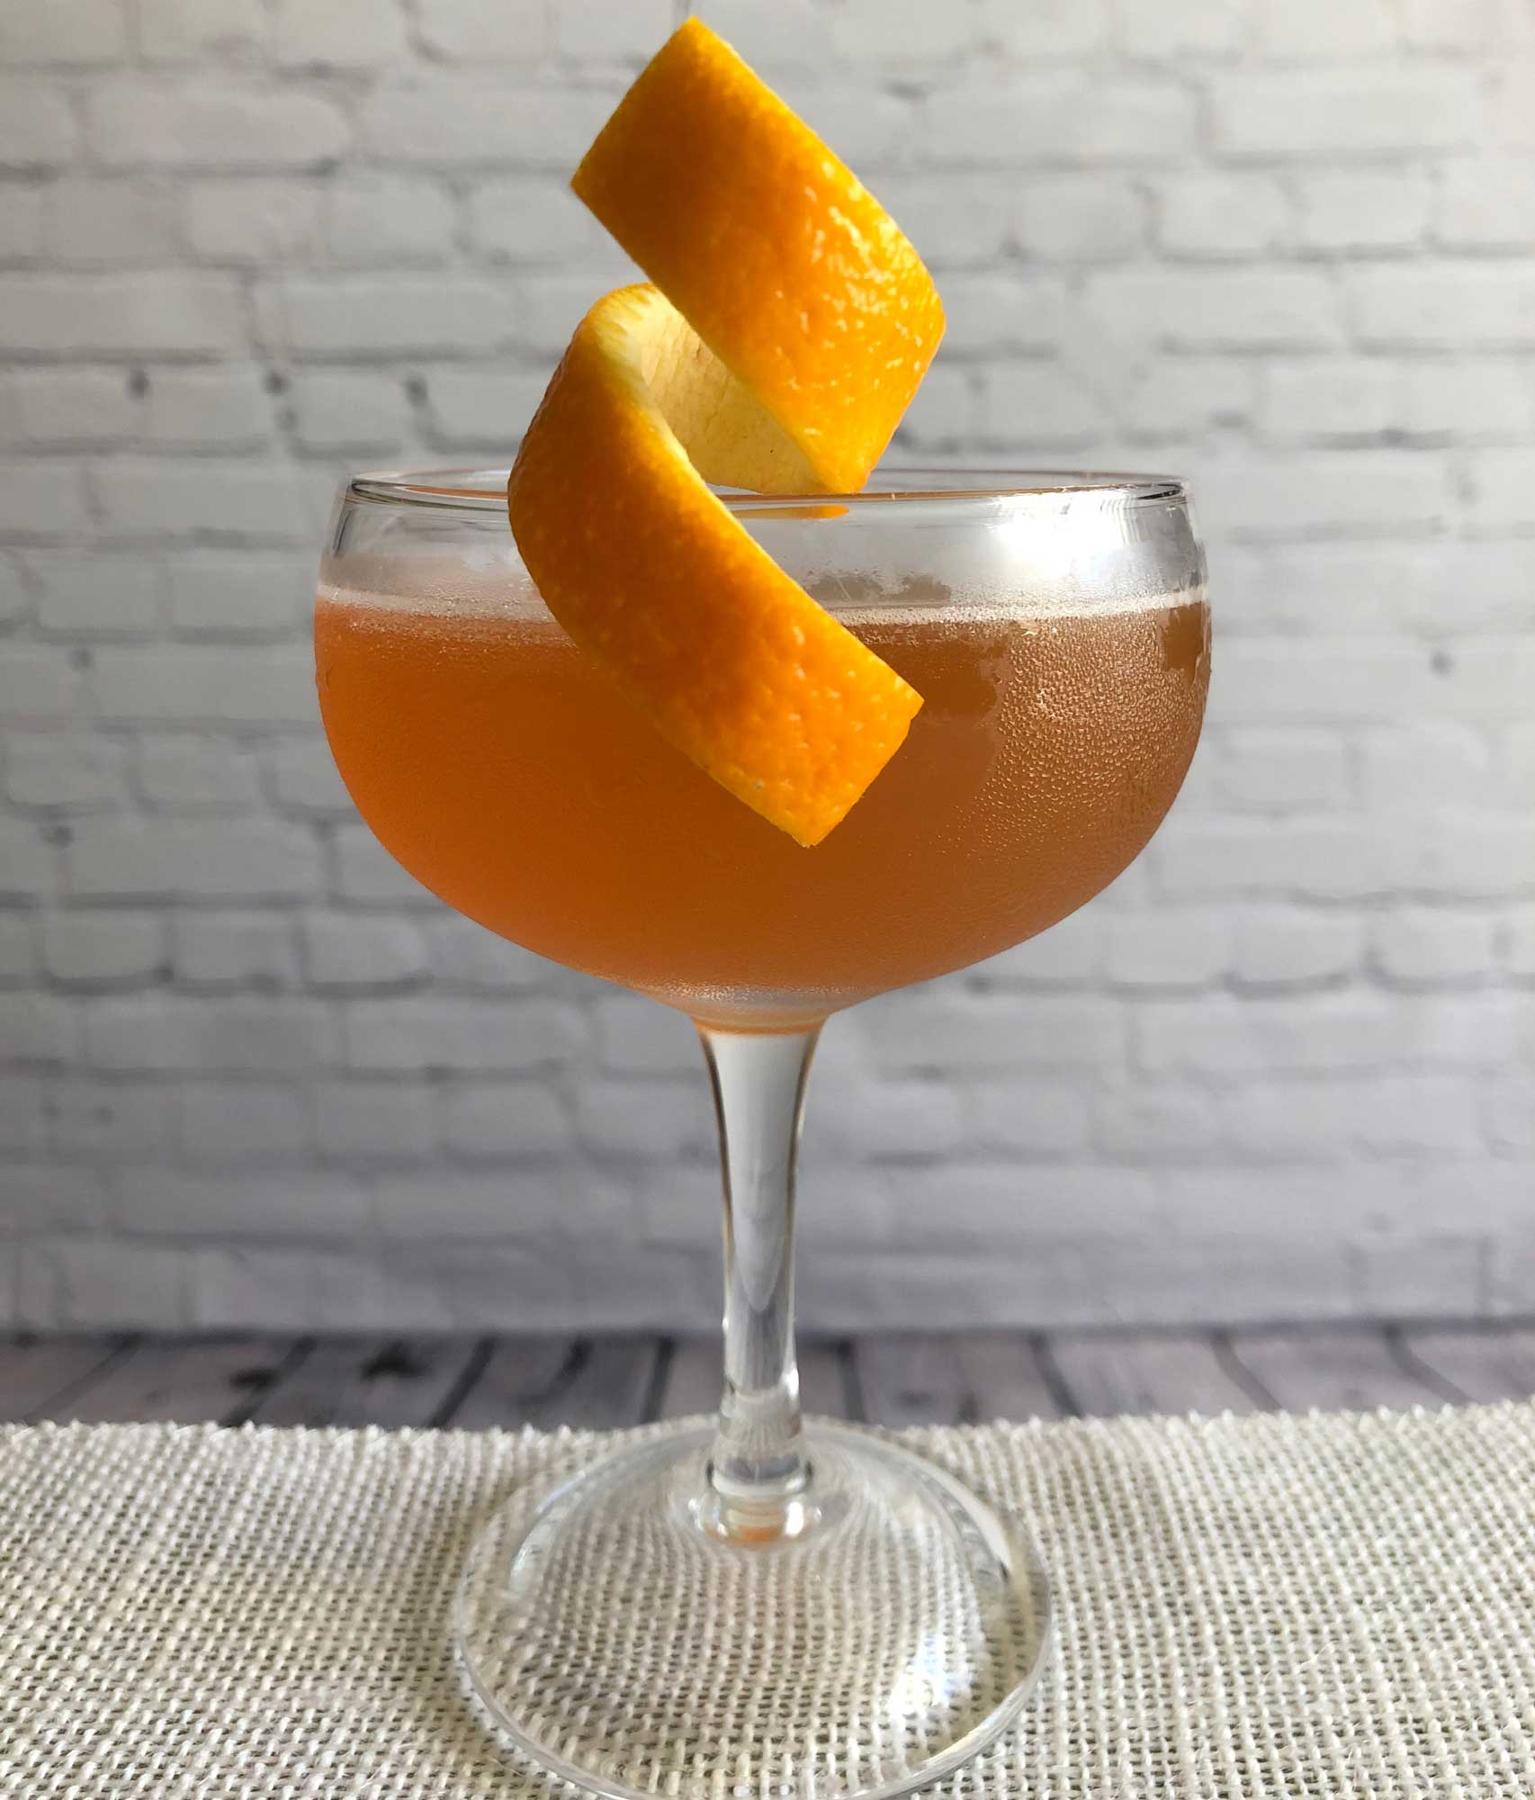 An example of the Diki-Diki, the mixed drink (drink), by Savoy Cocktail Book, featuring calvados, KRONAN Swedish Punsch, grapefruit juice, simple syrup, and orange twist; photo by Lee Edwards